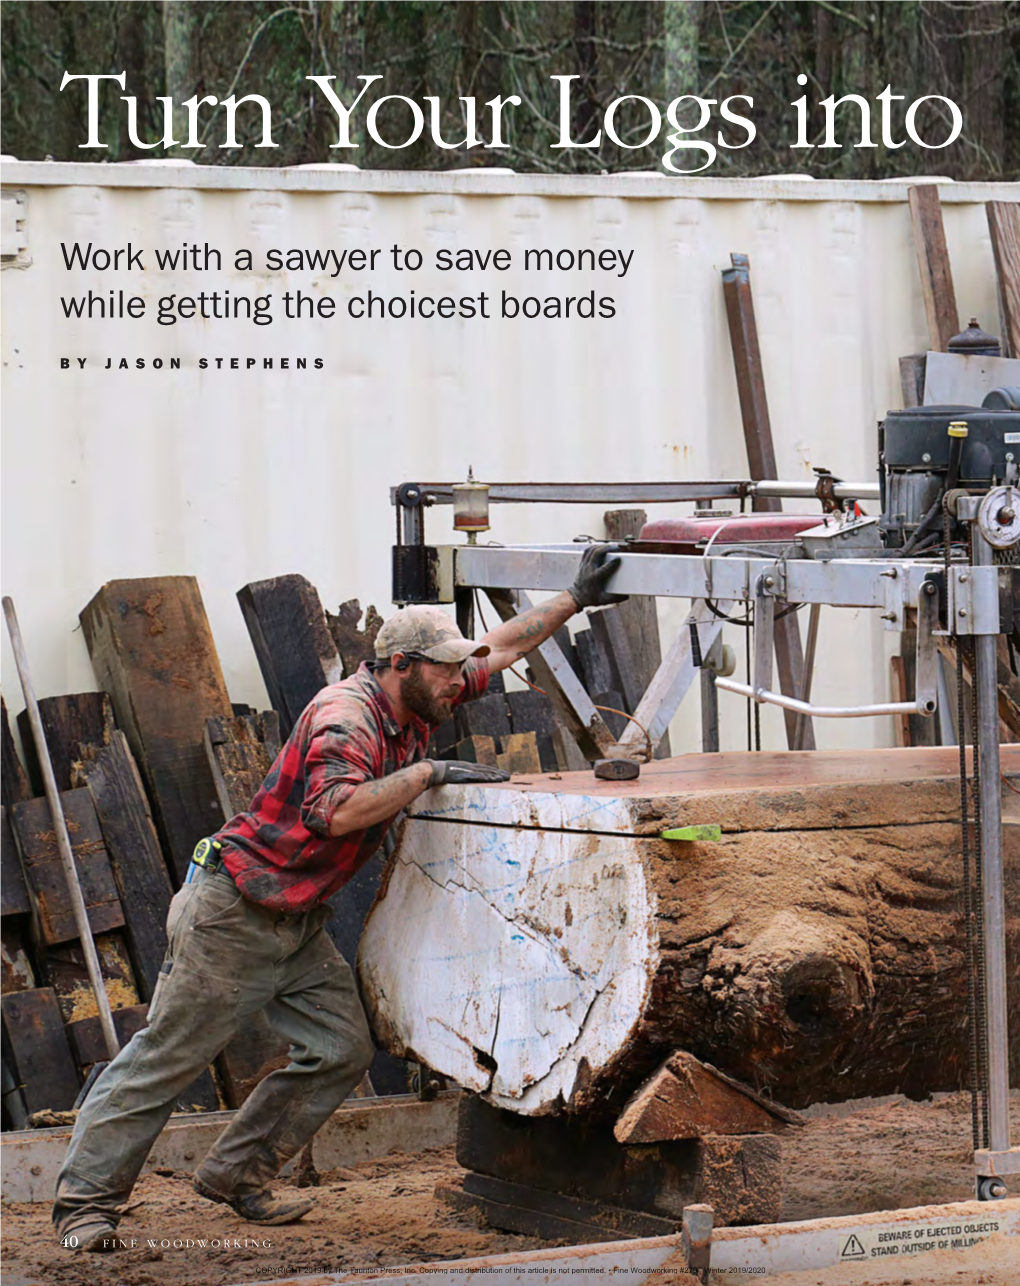 Work with a Sawyer to Save Money While Getting the Choicest Boards